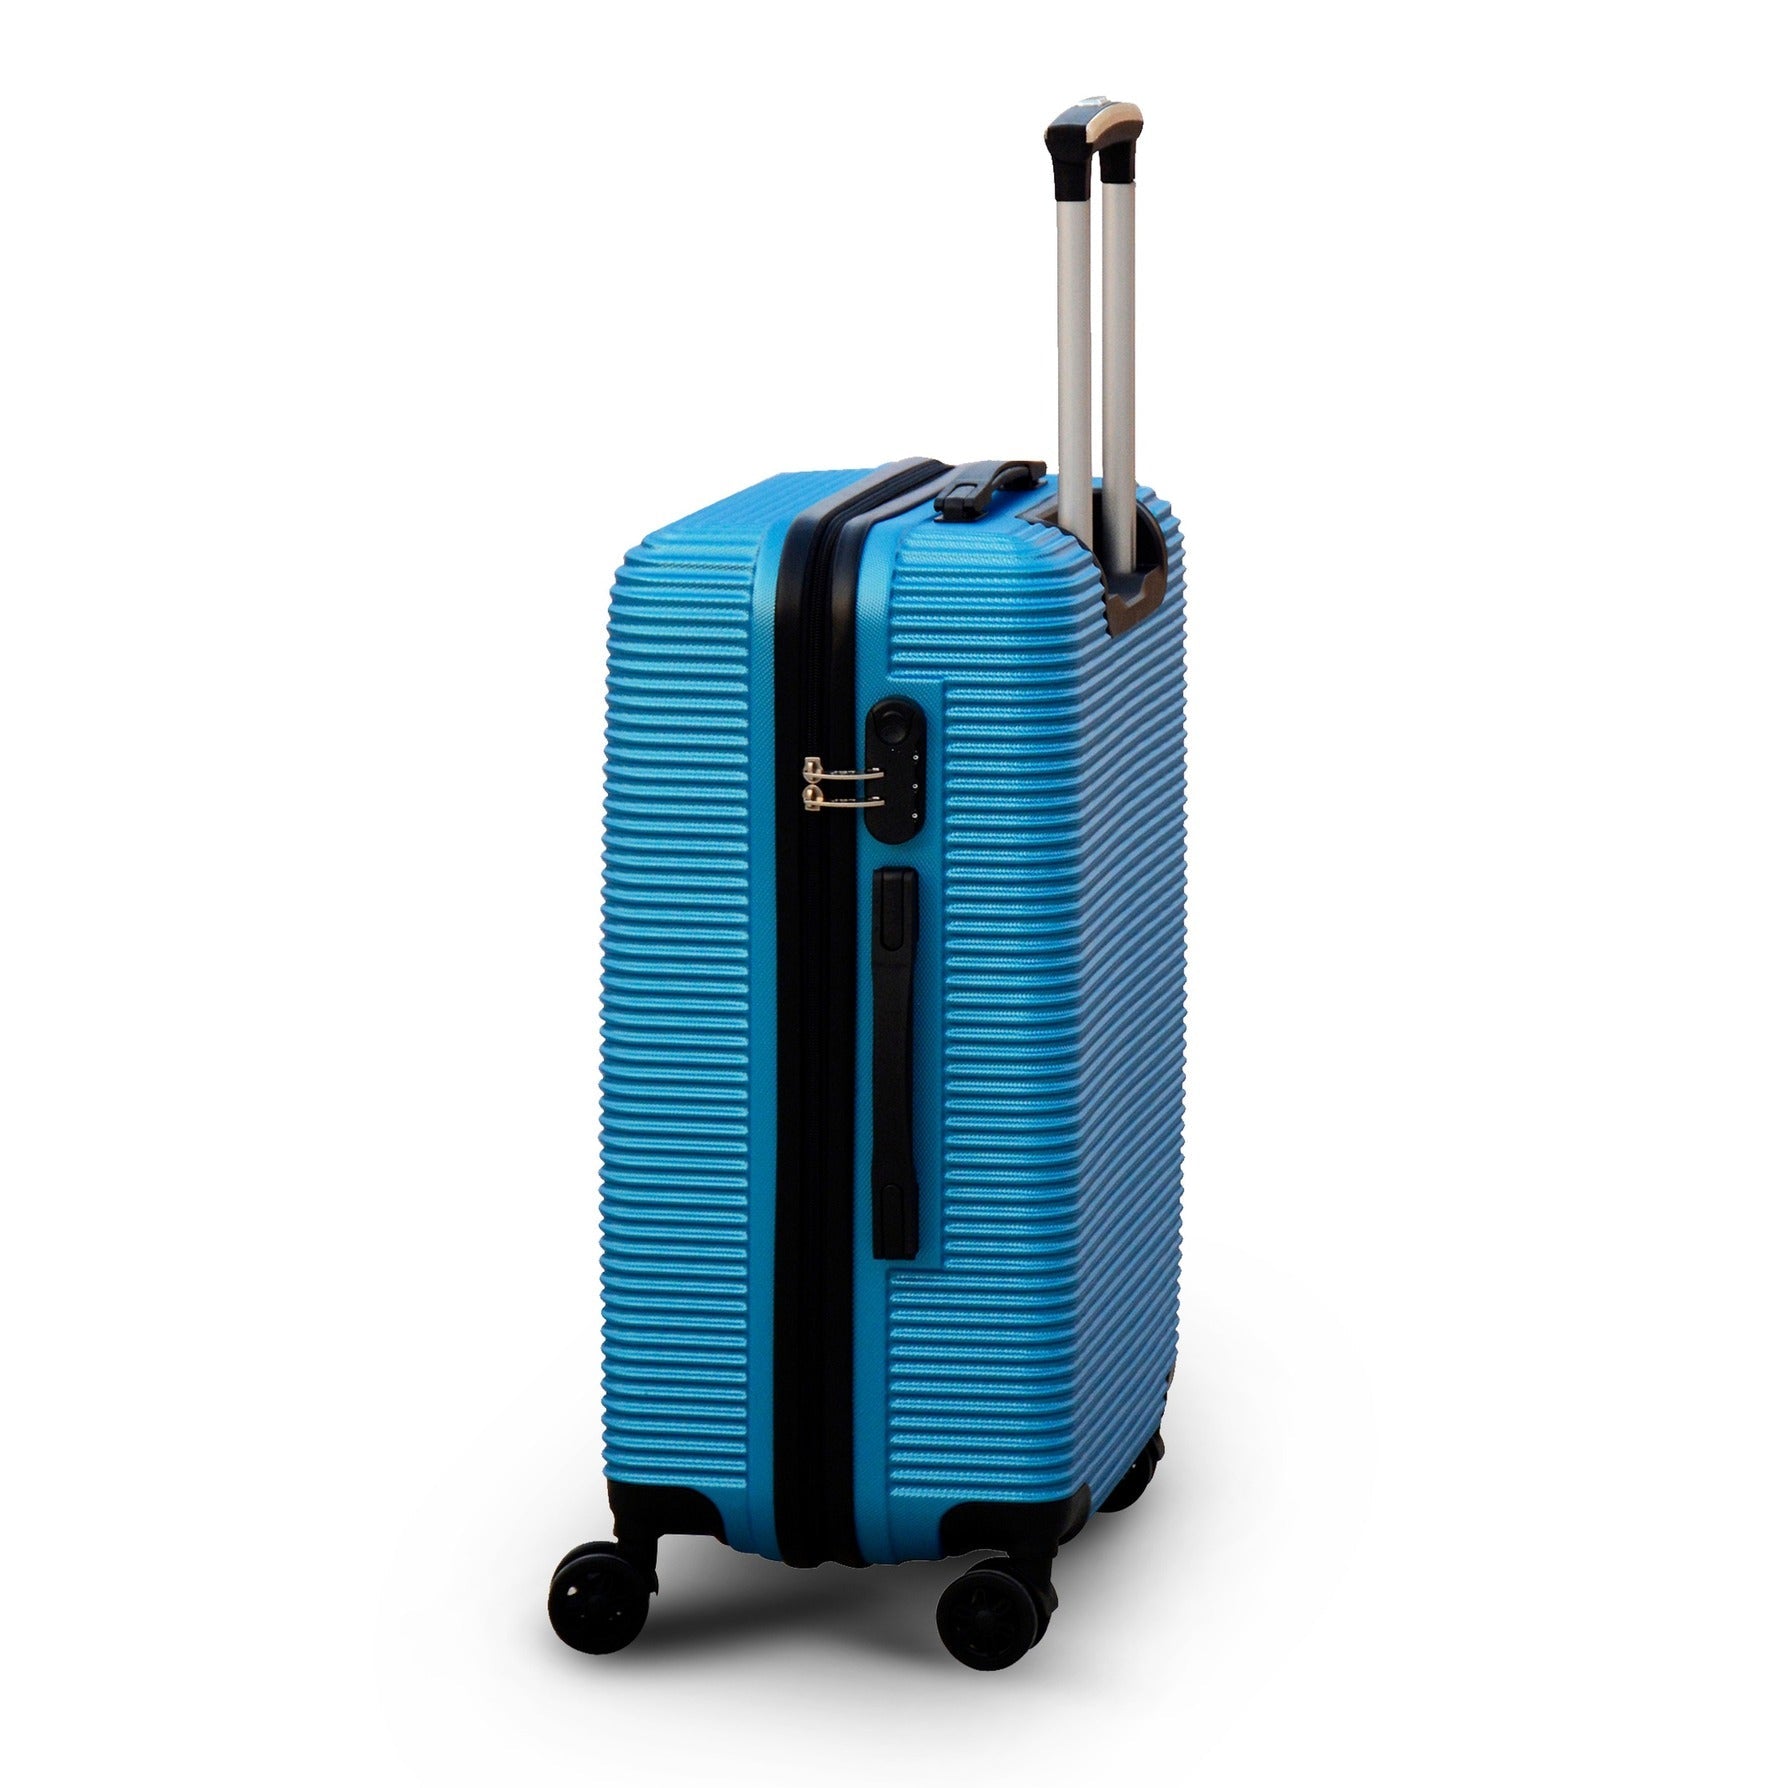 24" Light Blue Colour JIAN ABS Line Lightweight Luggage Bag With Spinner Wheel